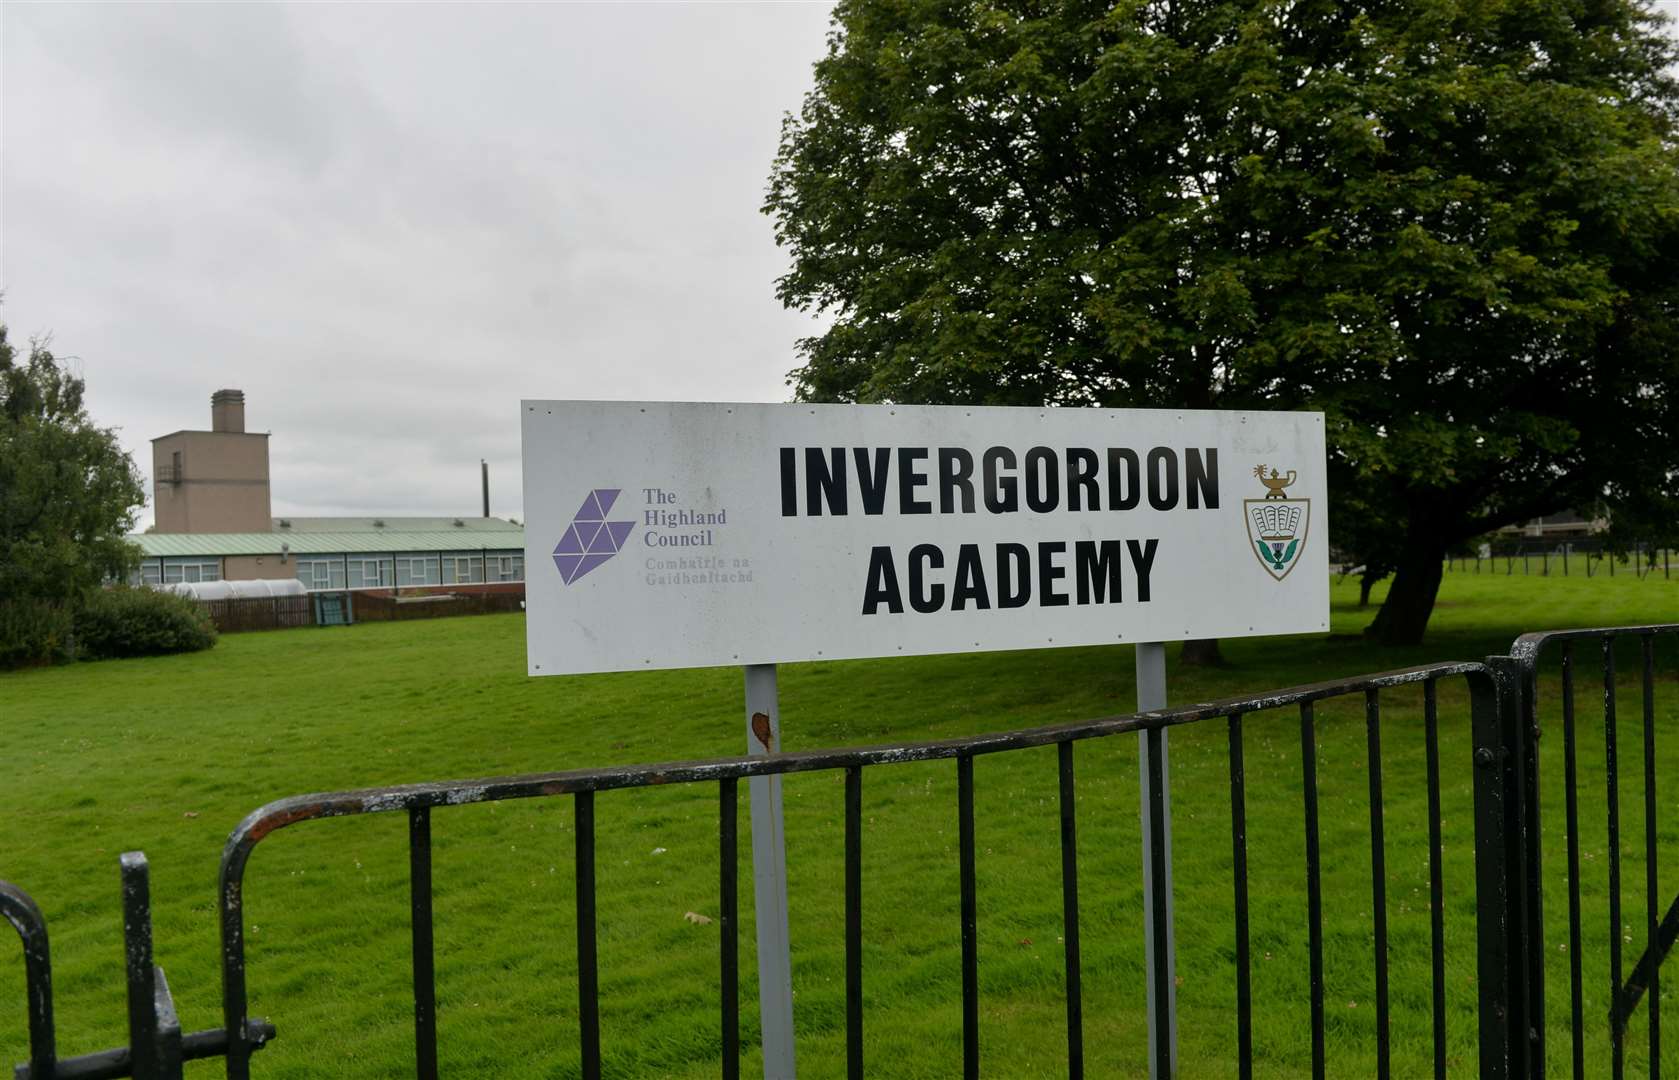 The nursery is temporarily housed within Invergordon Academy.